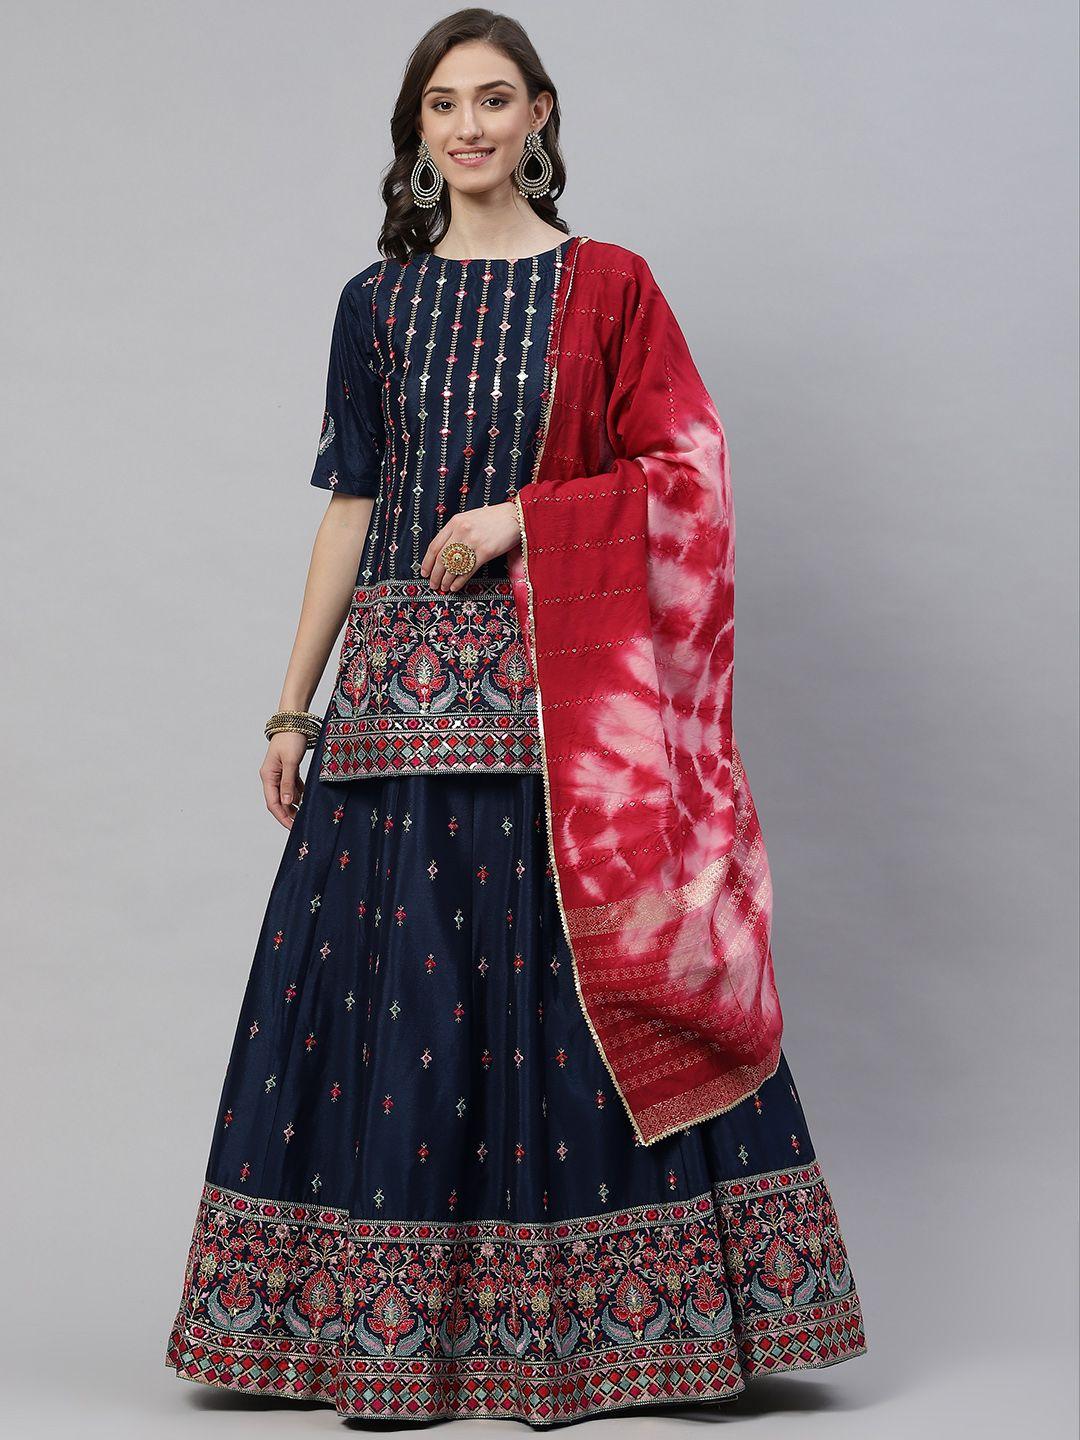 shubhkala navy blue & red embroidered mirror work semi-stitched lehenga & blouse with dupatta